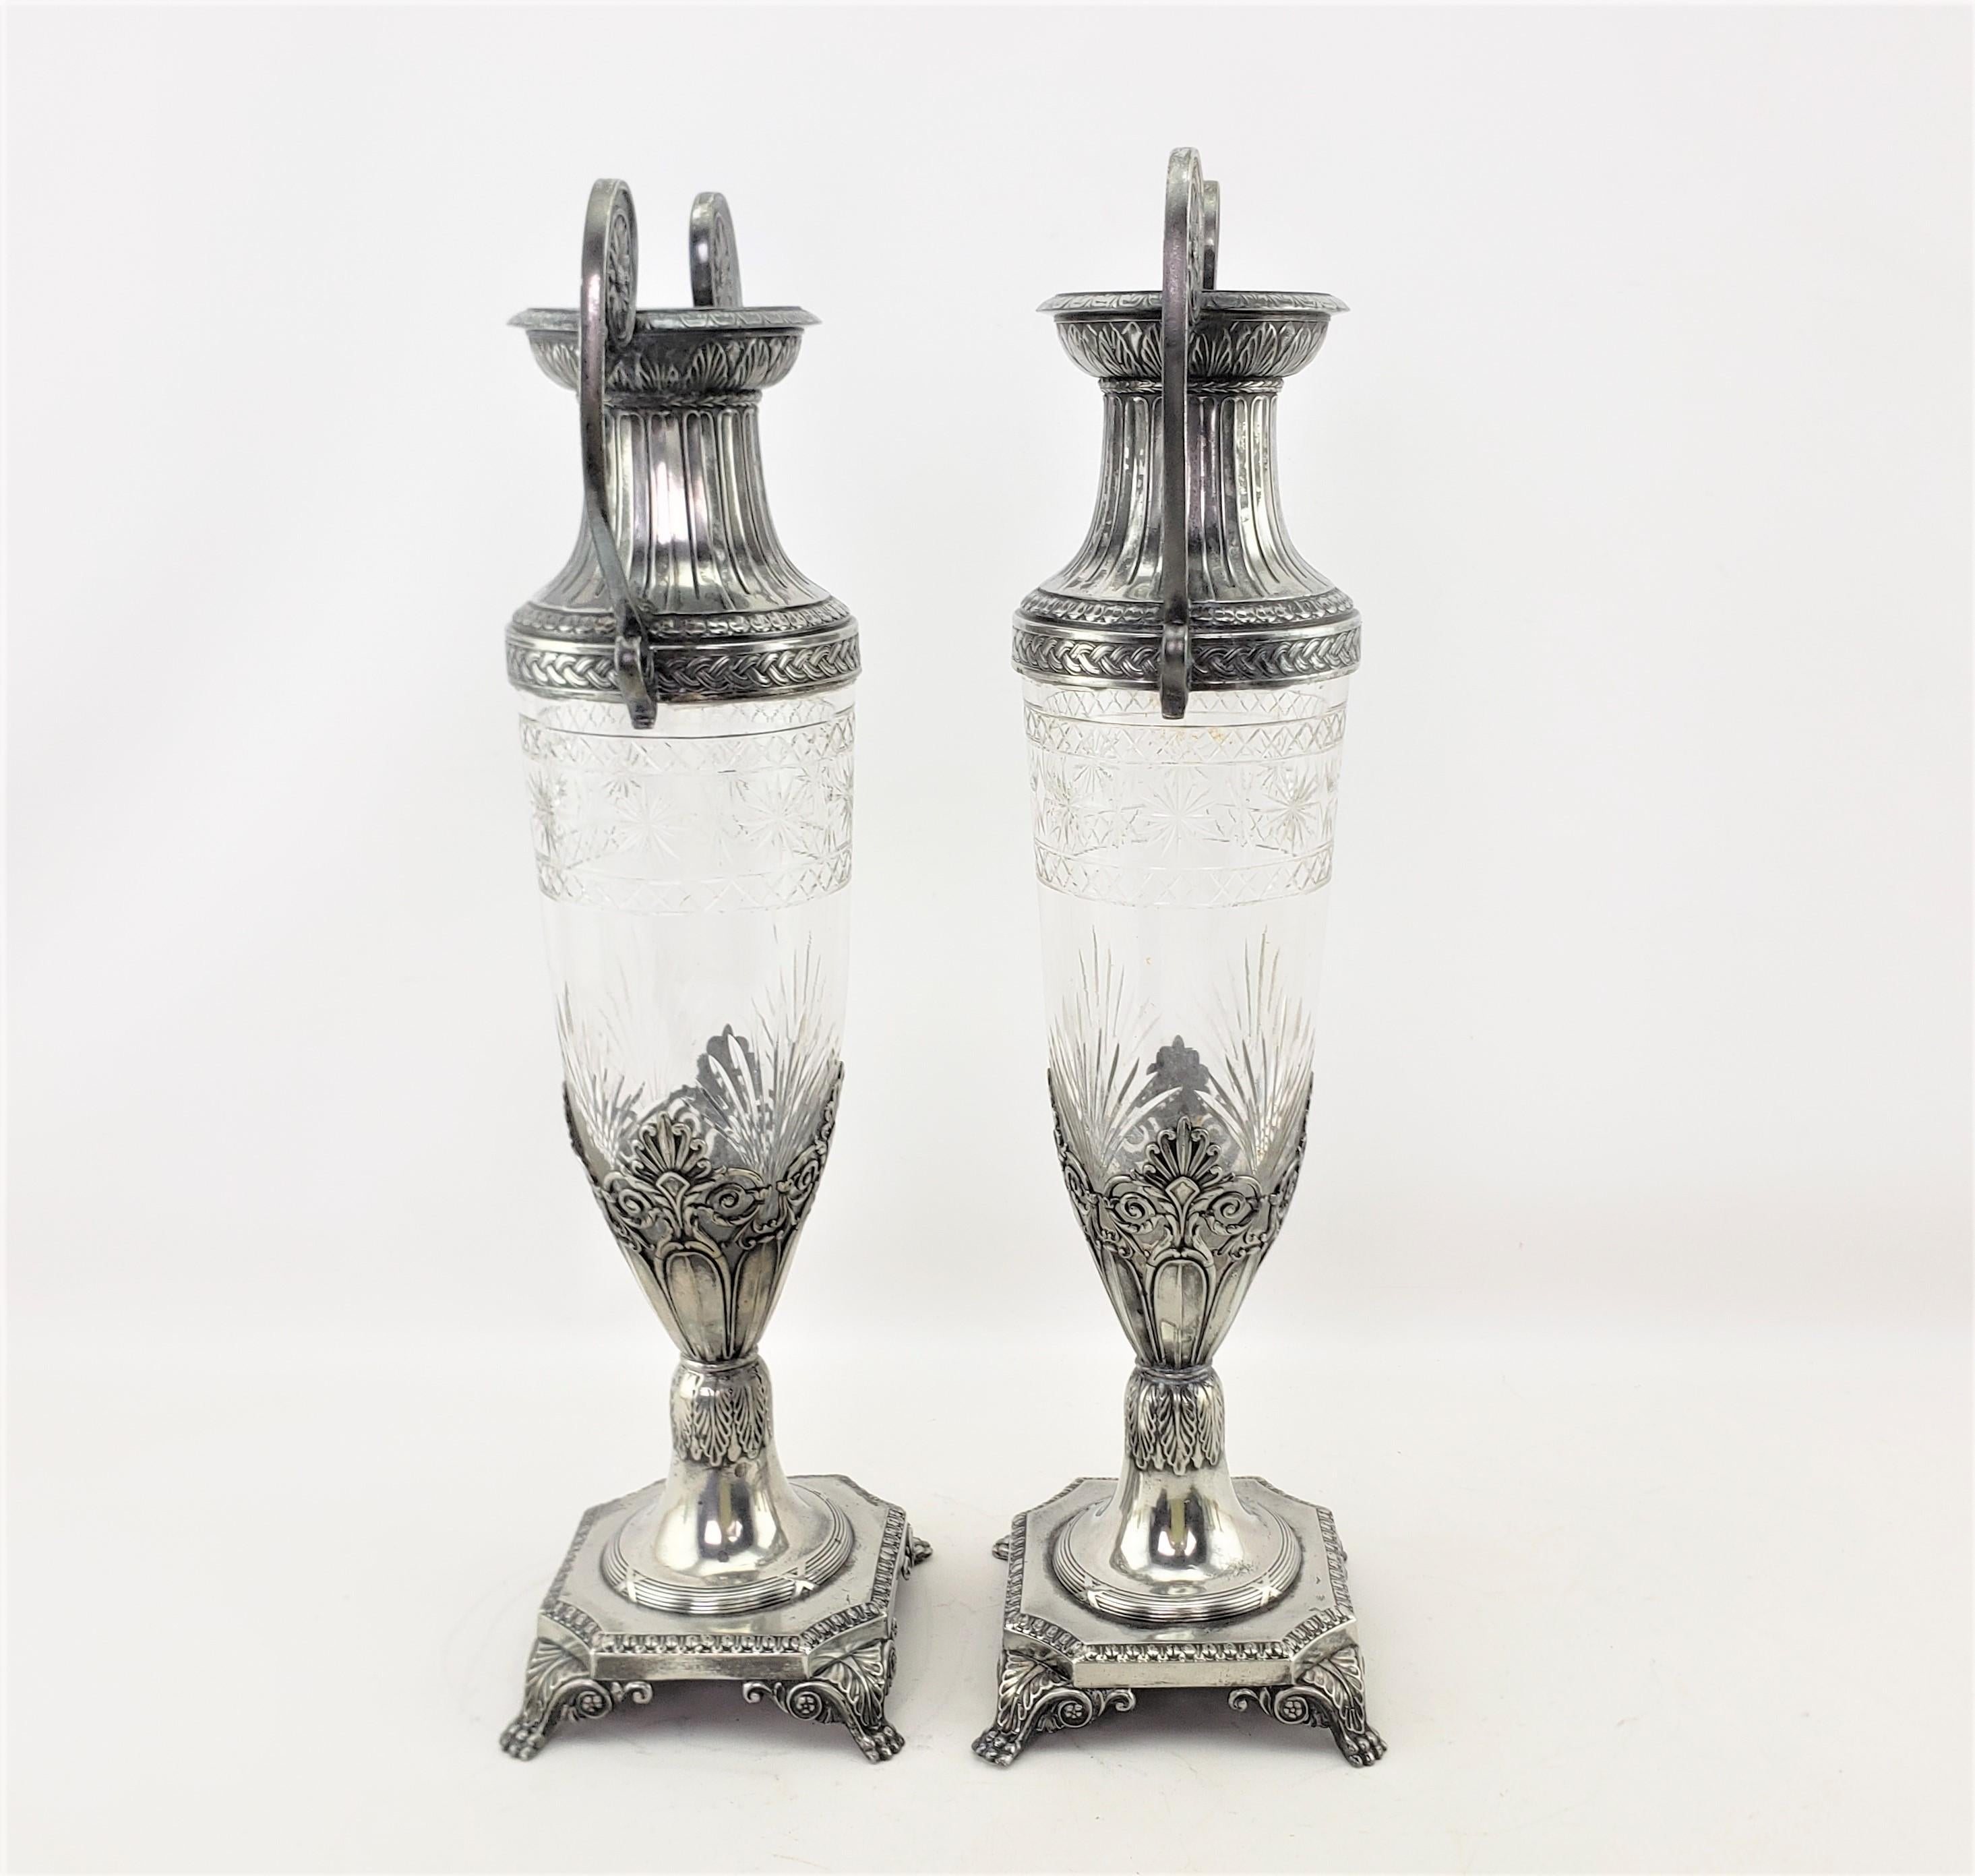 Pair of Antique WMF Cut Crystal with Silver Plated Mounts Seccessionist Vases For Sale 2